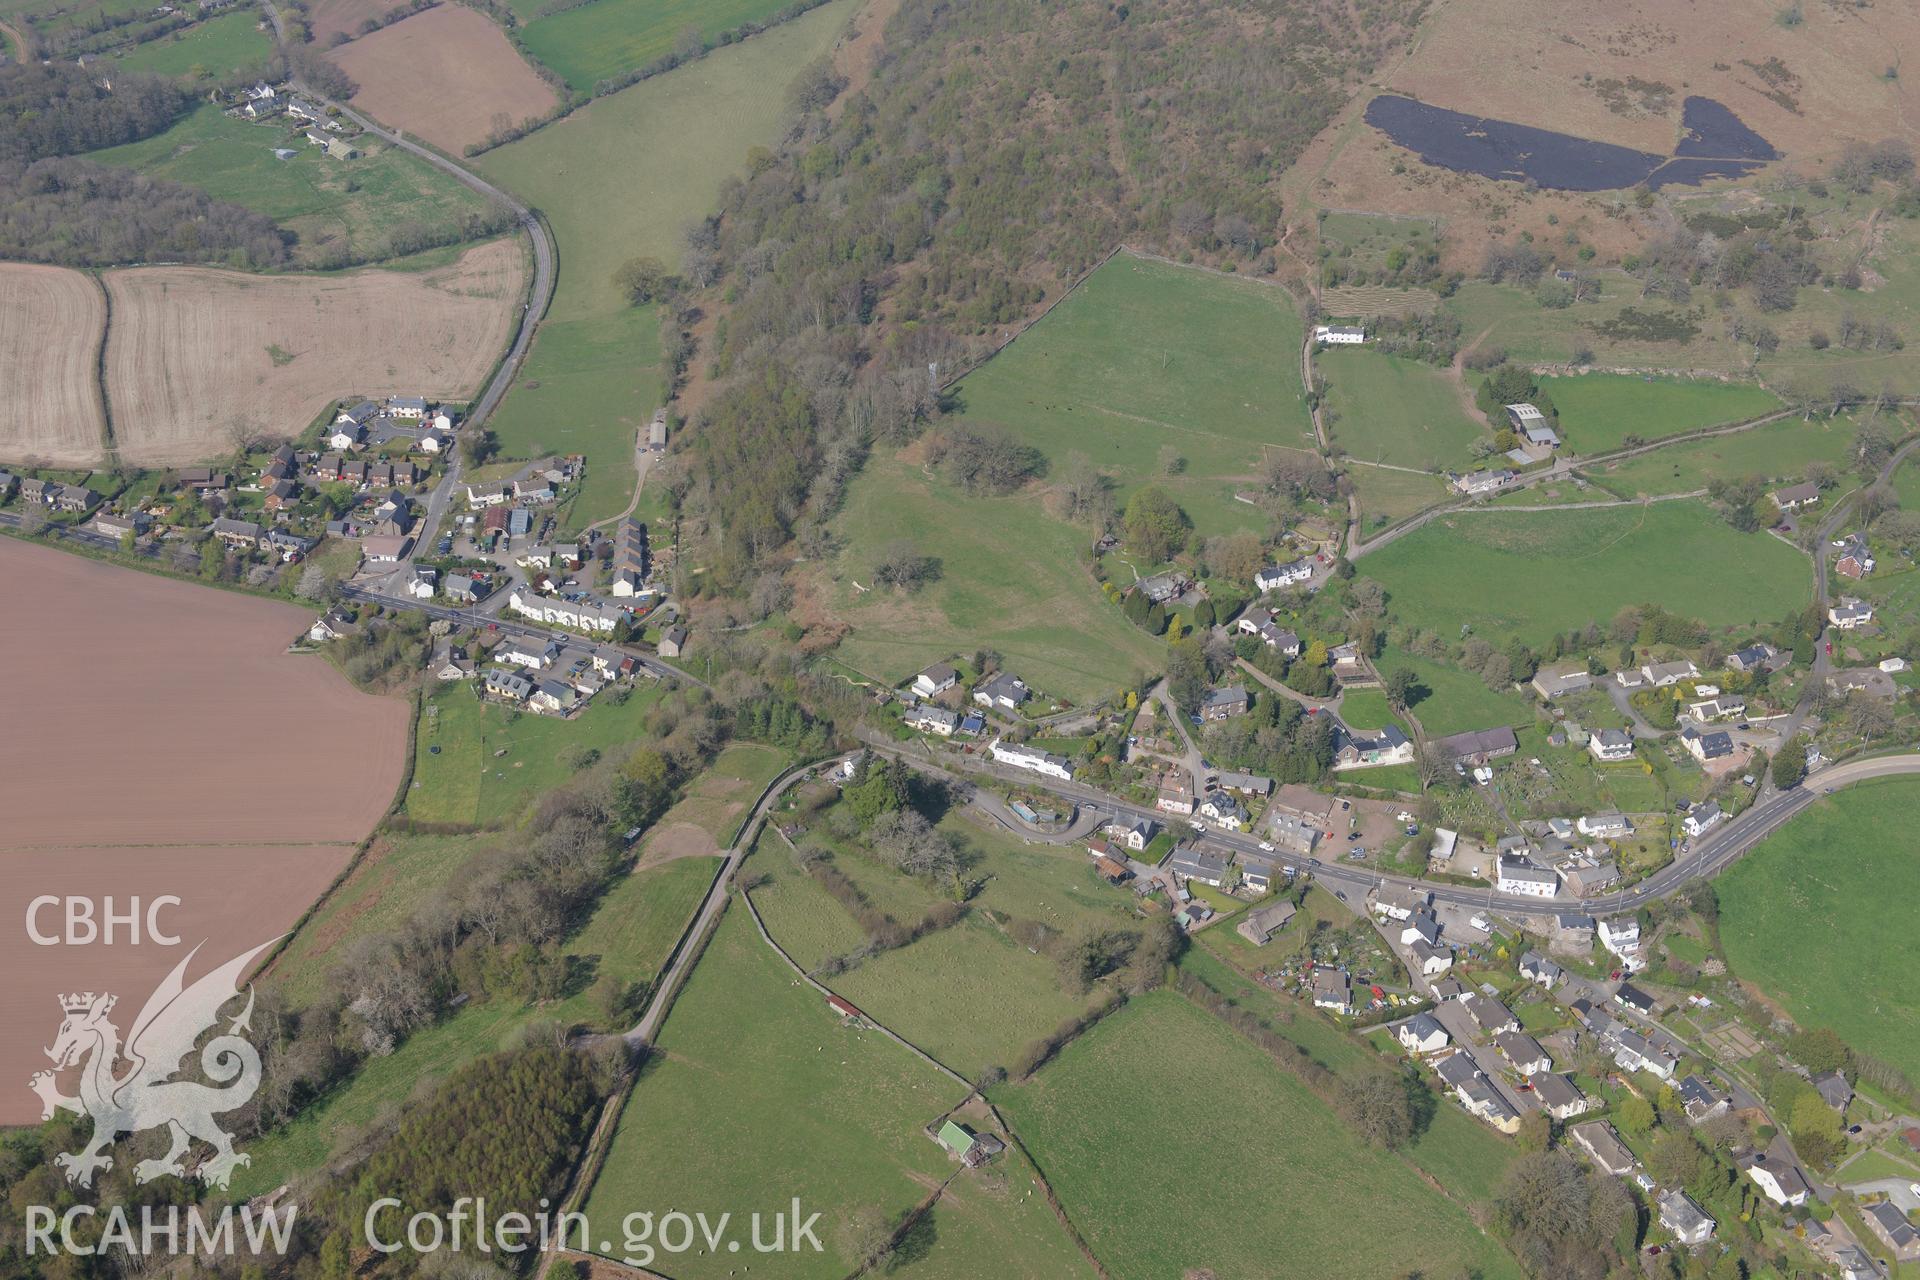 Bwlch including views of All Saint's Church, Penuel Chapel and defensive enclosure. Oblique aerial photograph taken during the Royal Commission's programme of archaeological aerial reconnaissance by Toby Driver on 21st April 2015.